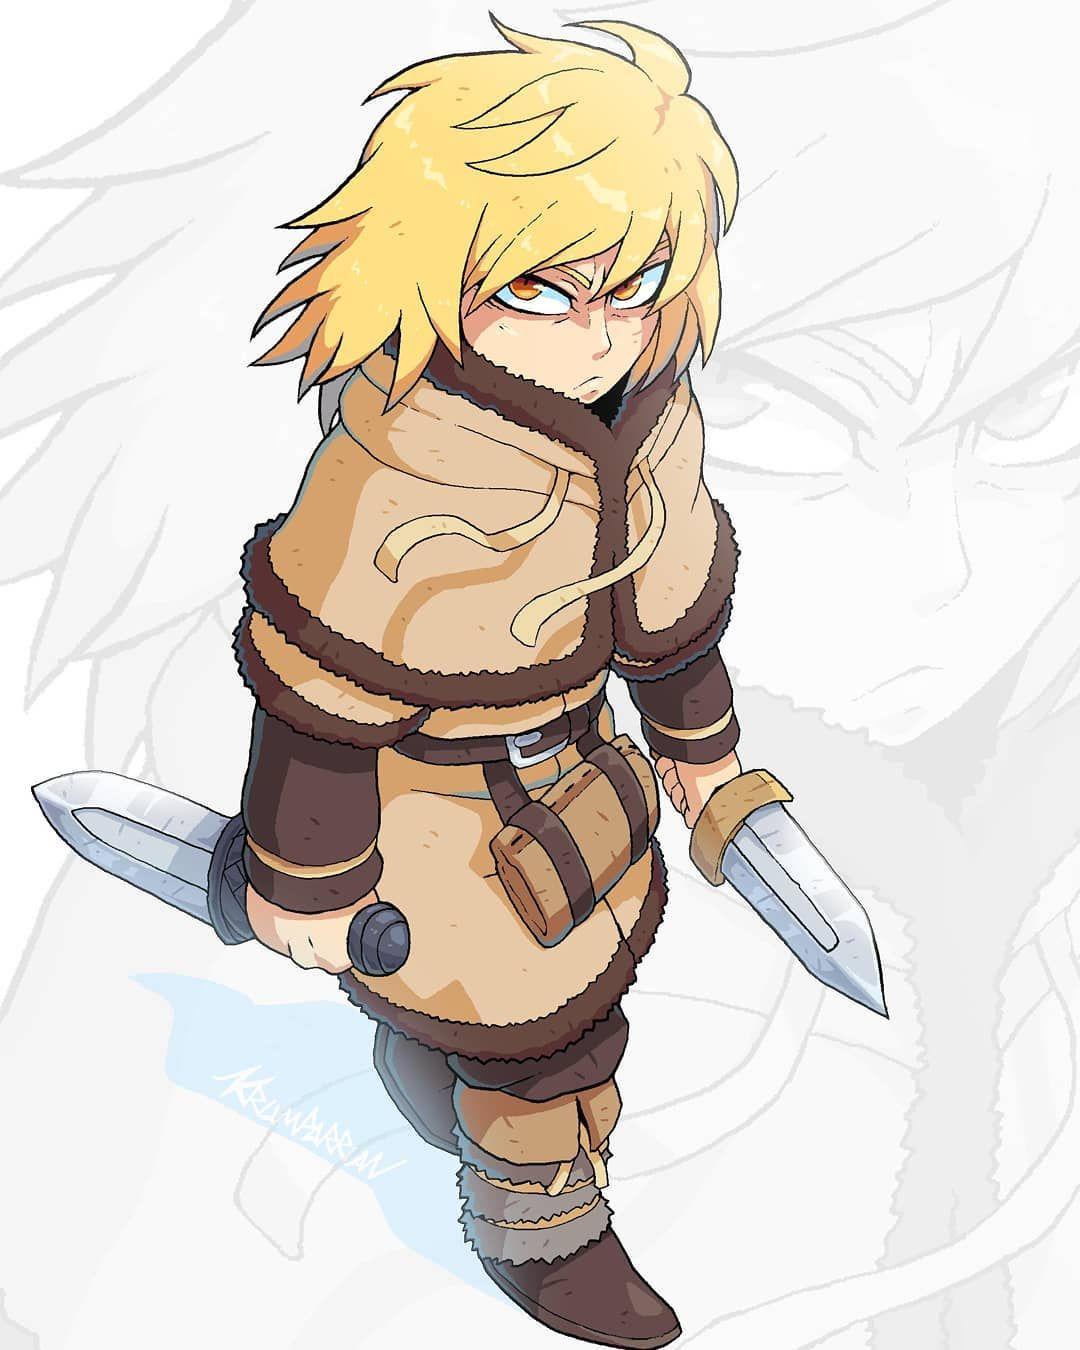 Thorfinn from Vinland Saga so HYPED for this anime